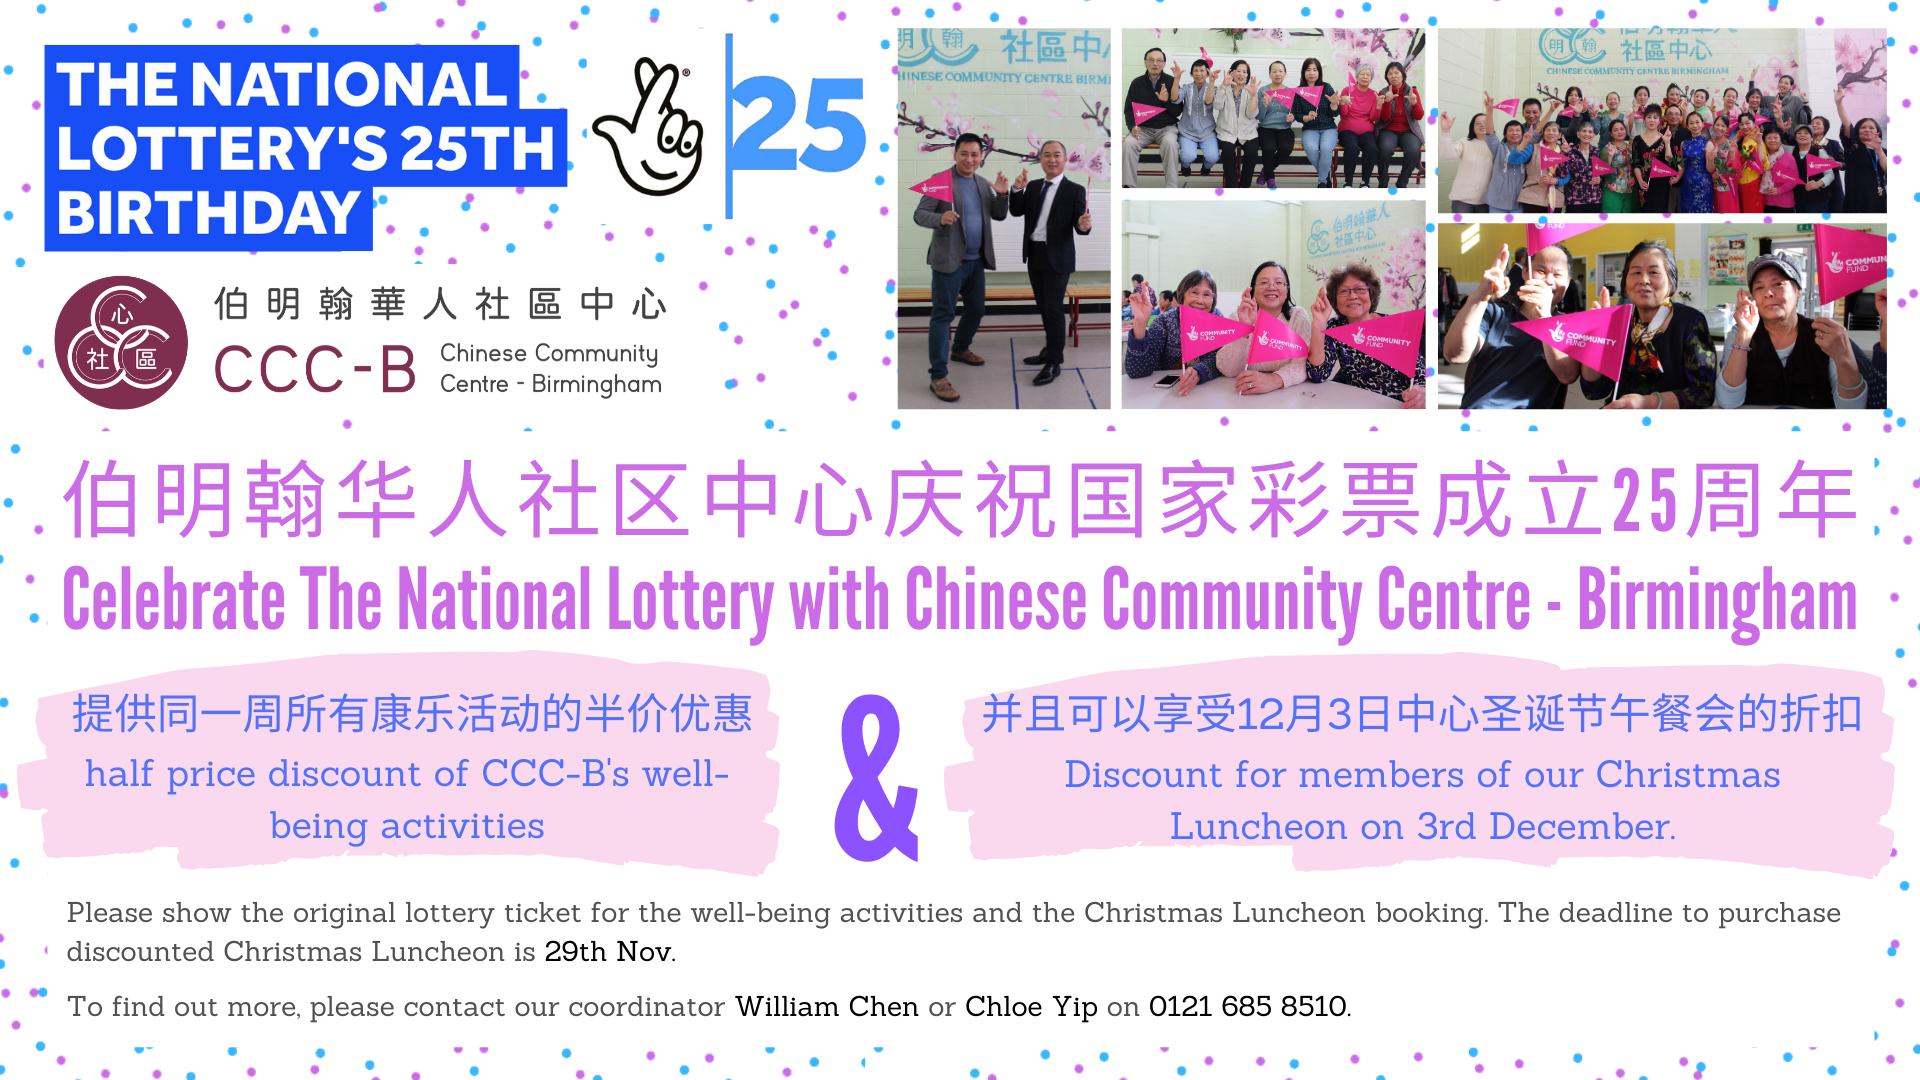 Celebrate The National Lottery with Chinese Community Centre – 伯明翰华人社区中心 庆祝国家彩票成立25周年